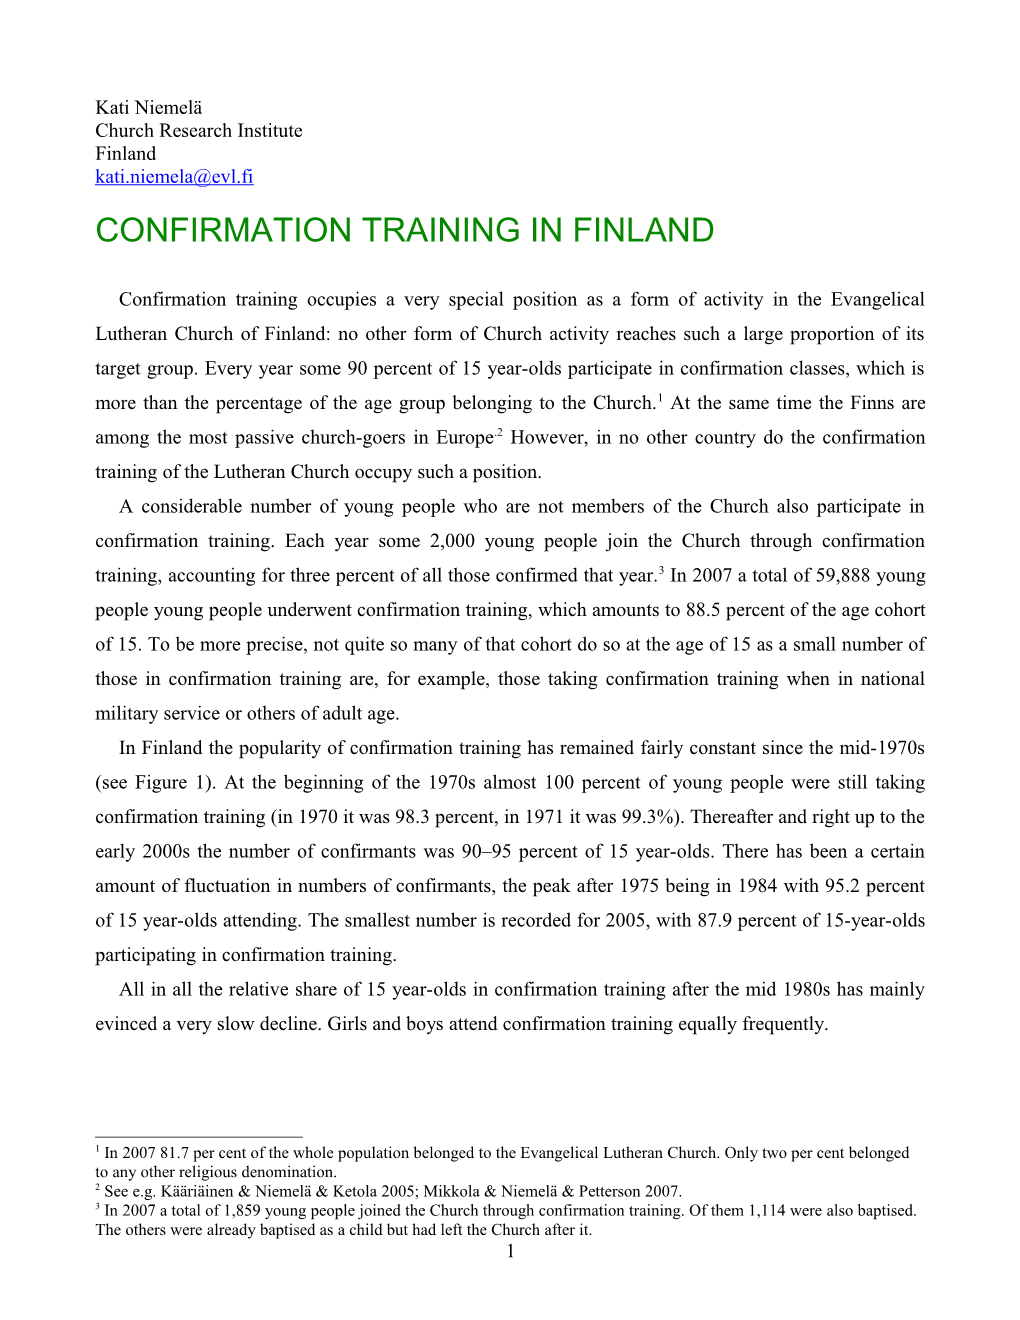 Confirmation Training in Finland